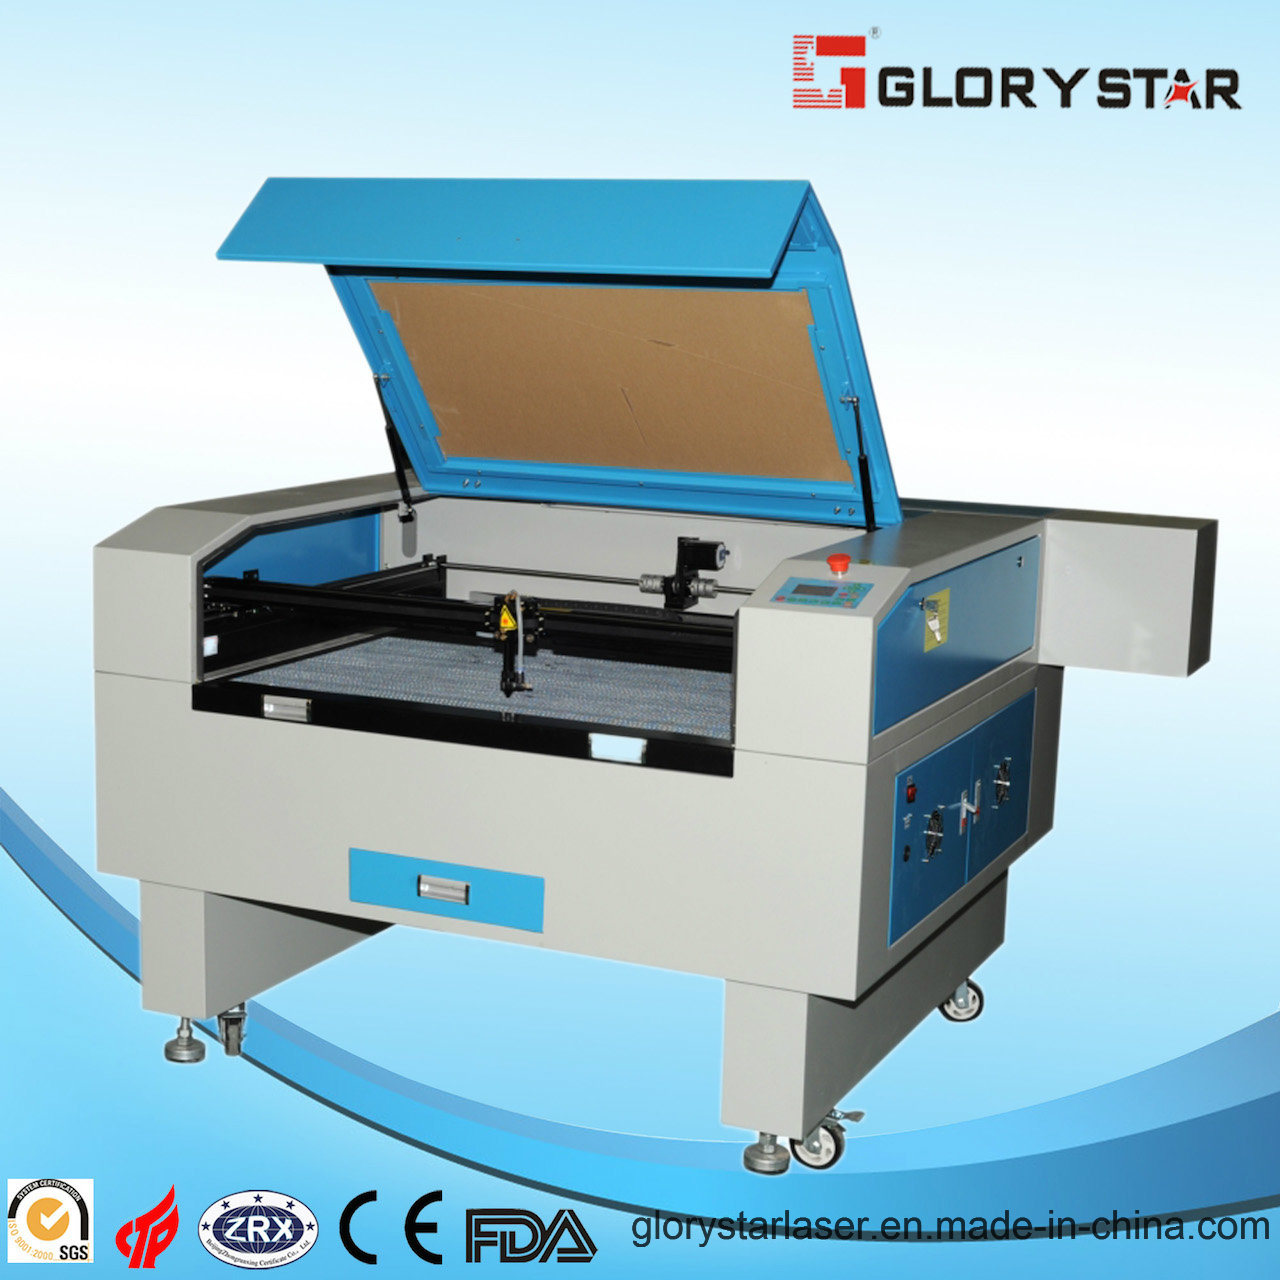 Laser Cutting and Engraving Machine for Paper, Fabric and Plastic Material